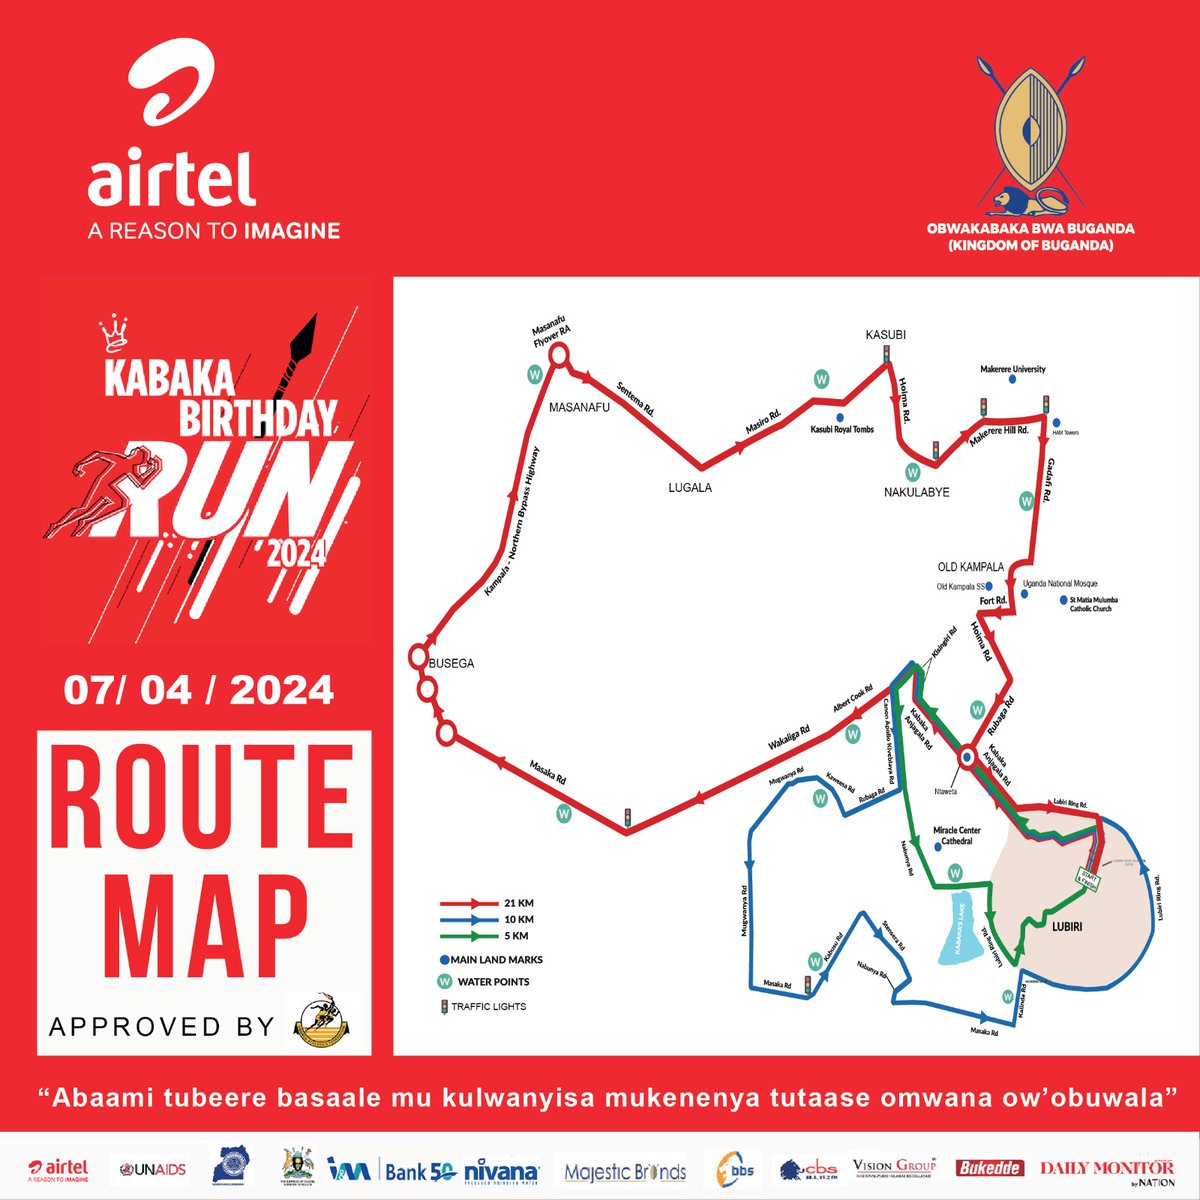 The Kabaka Birthday run 2024 route map is out!
Plan your every step for 5KM, 10KM, and 21Km starting at Lubiri, Mengo as we race towards a future without AIDS.

#AirtelKabakaRun2024